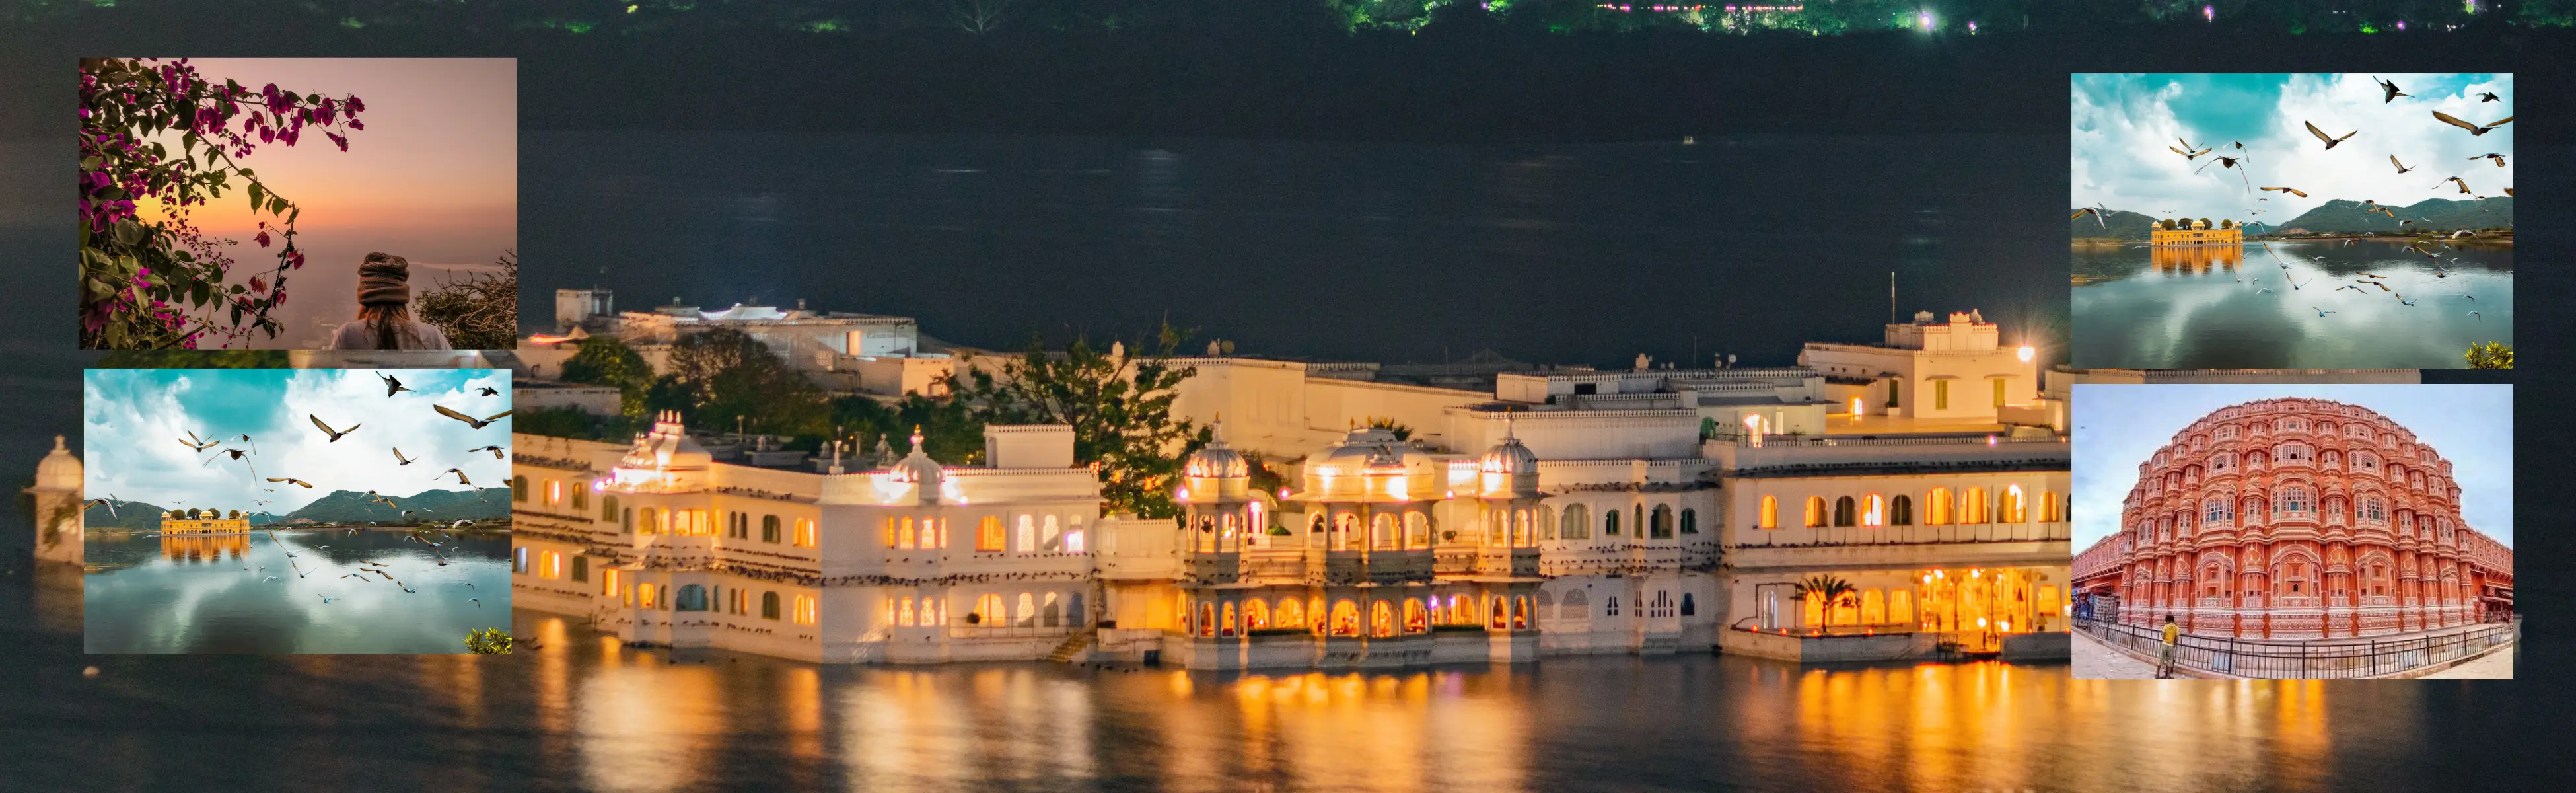 Jaipur, Udaipur, Mount Abu, Chandigarh Airport,  From  Chandigarh    Tour Packages